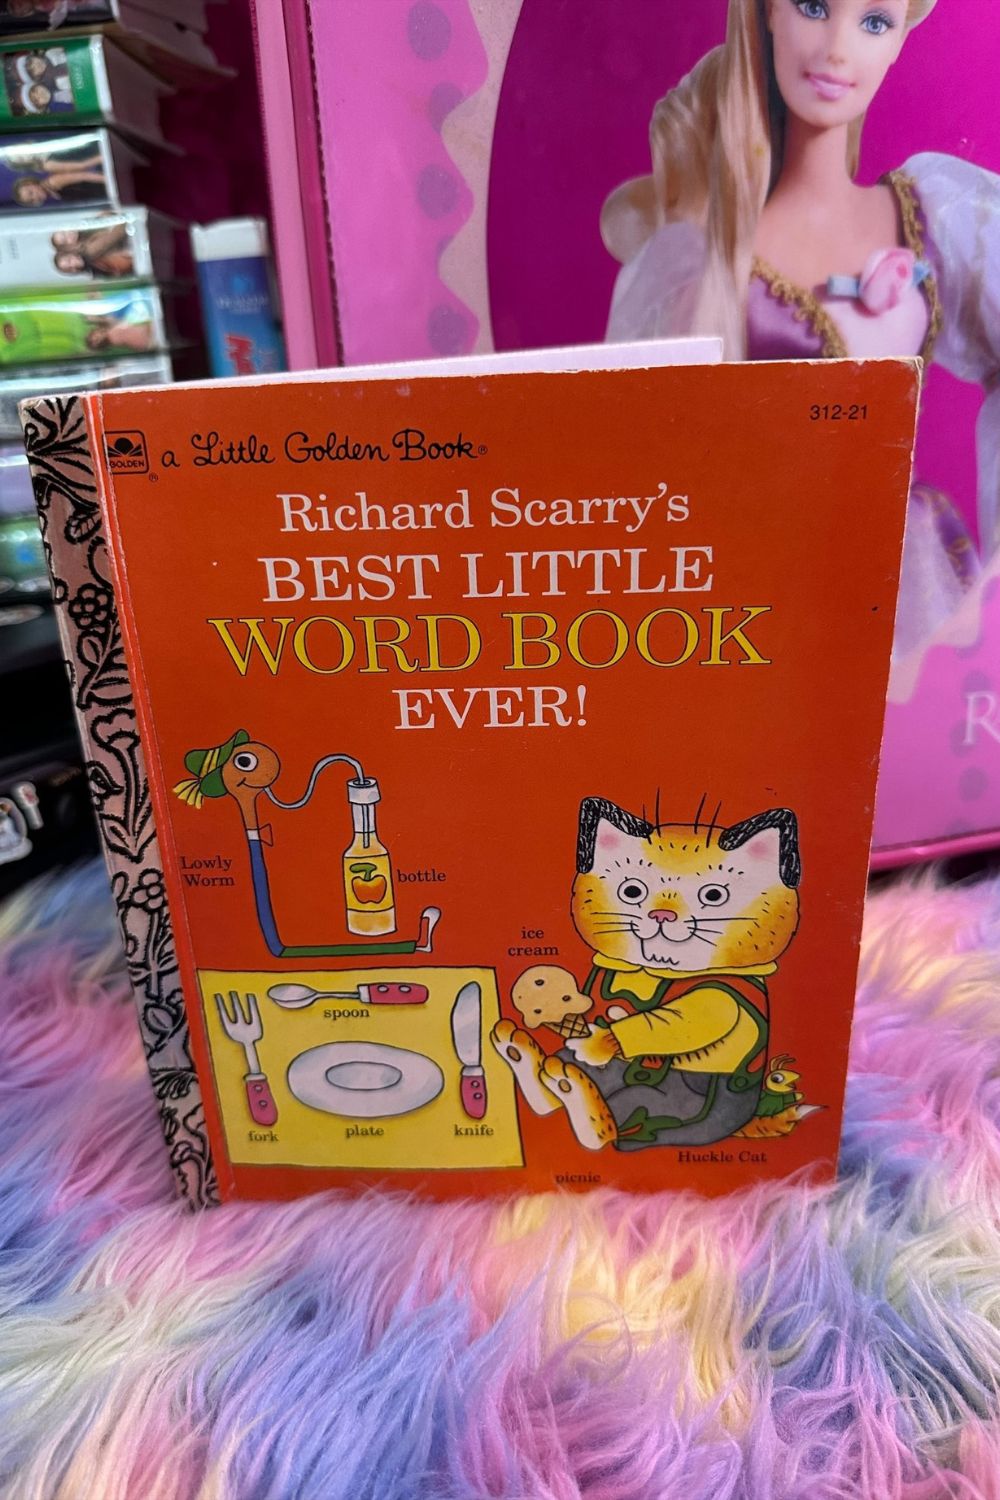 RICHARD SCARRY'S BEST LITTLE WORD BOOK EVER*